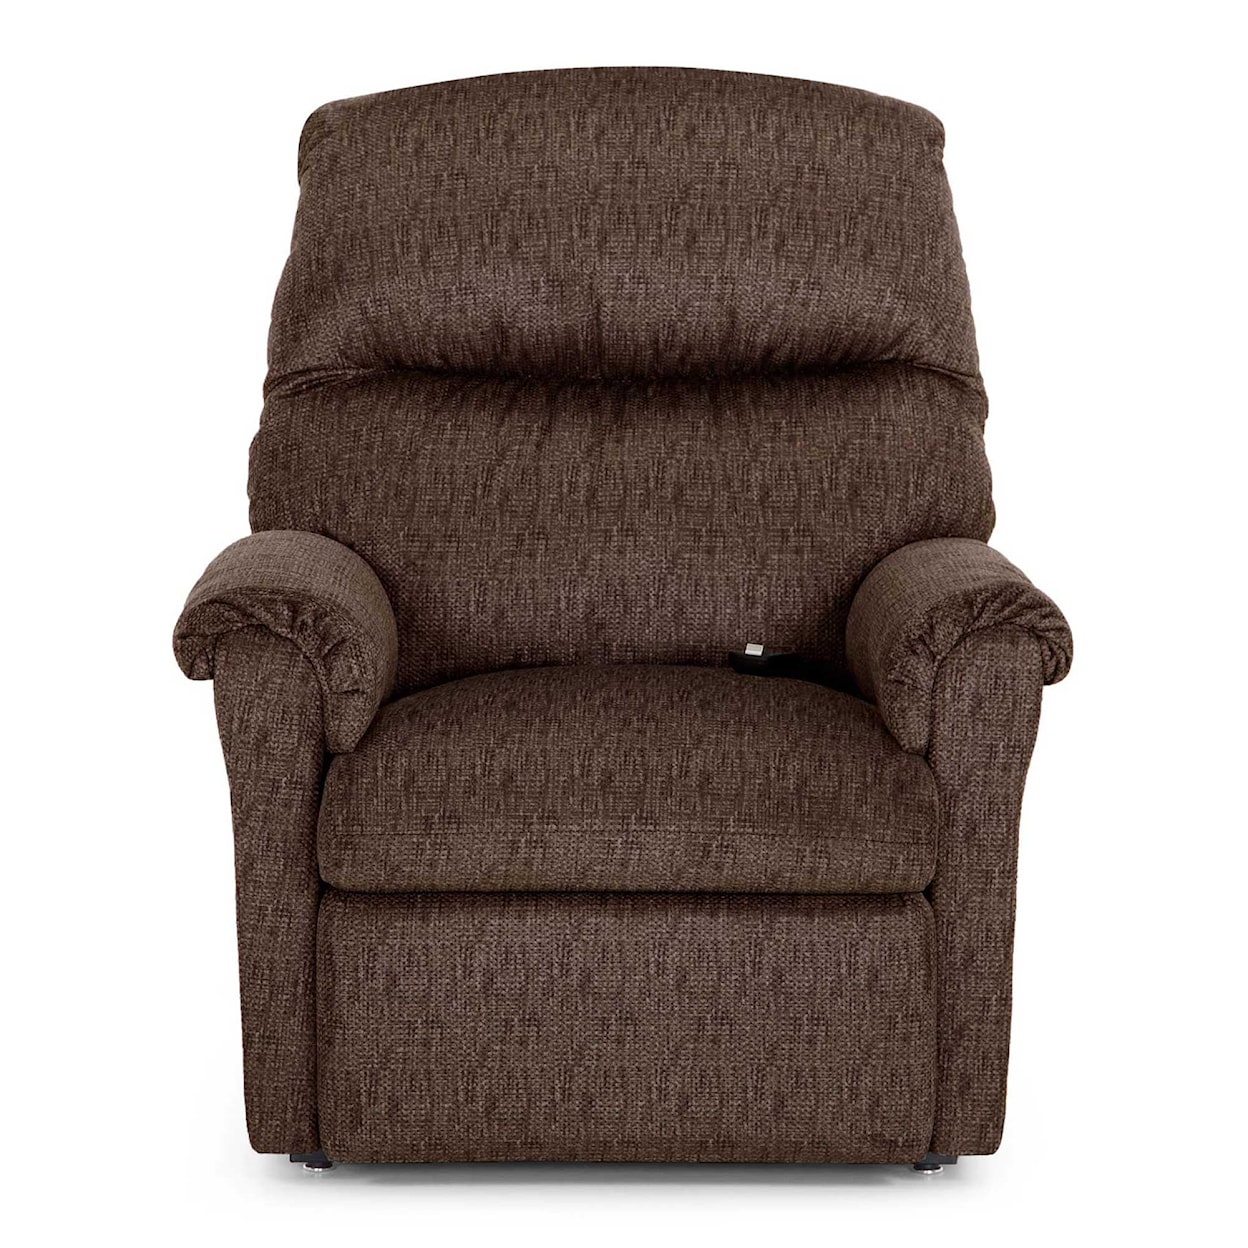 Franklin 481 Mable Mable Lift Chair